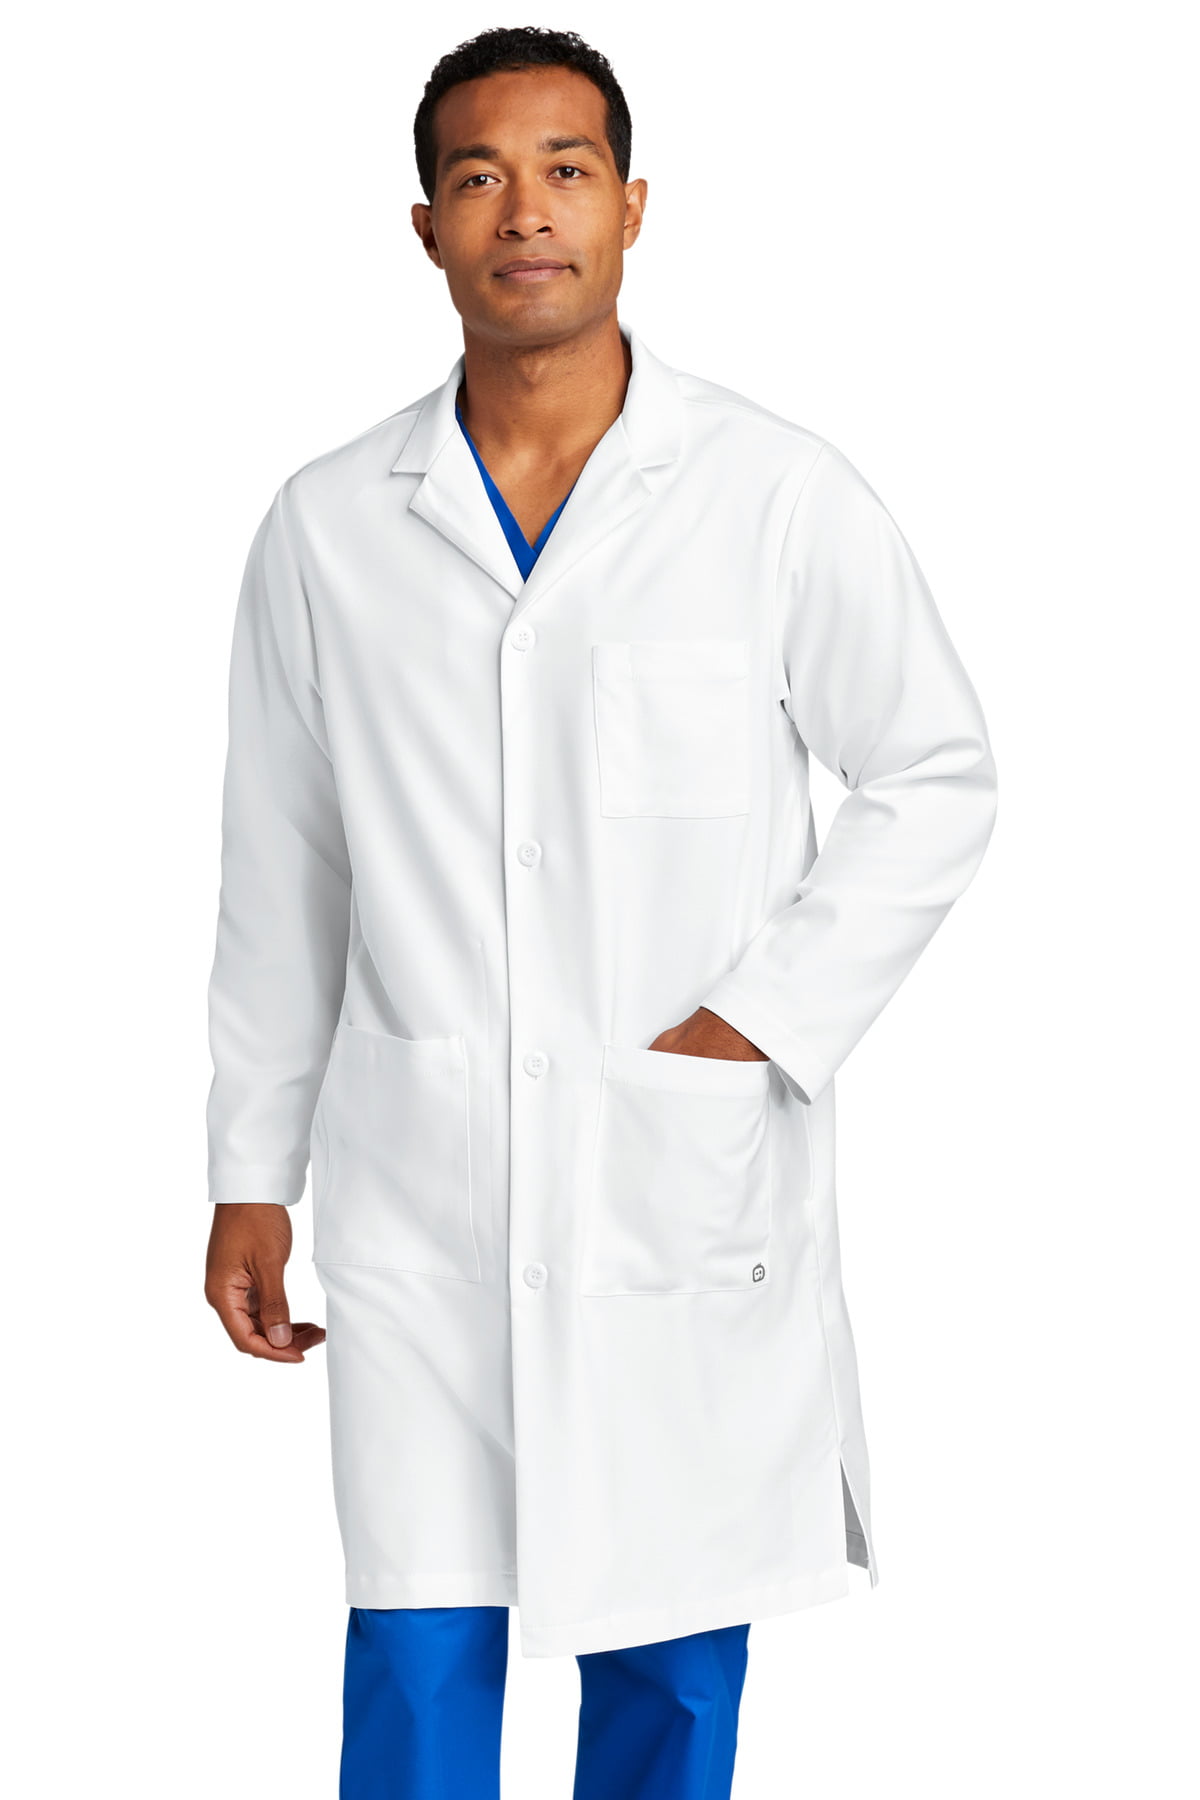 Mens White Polycotton Long Sleeve Lab Coat Adults Chest Pocket Science Lab Coat 